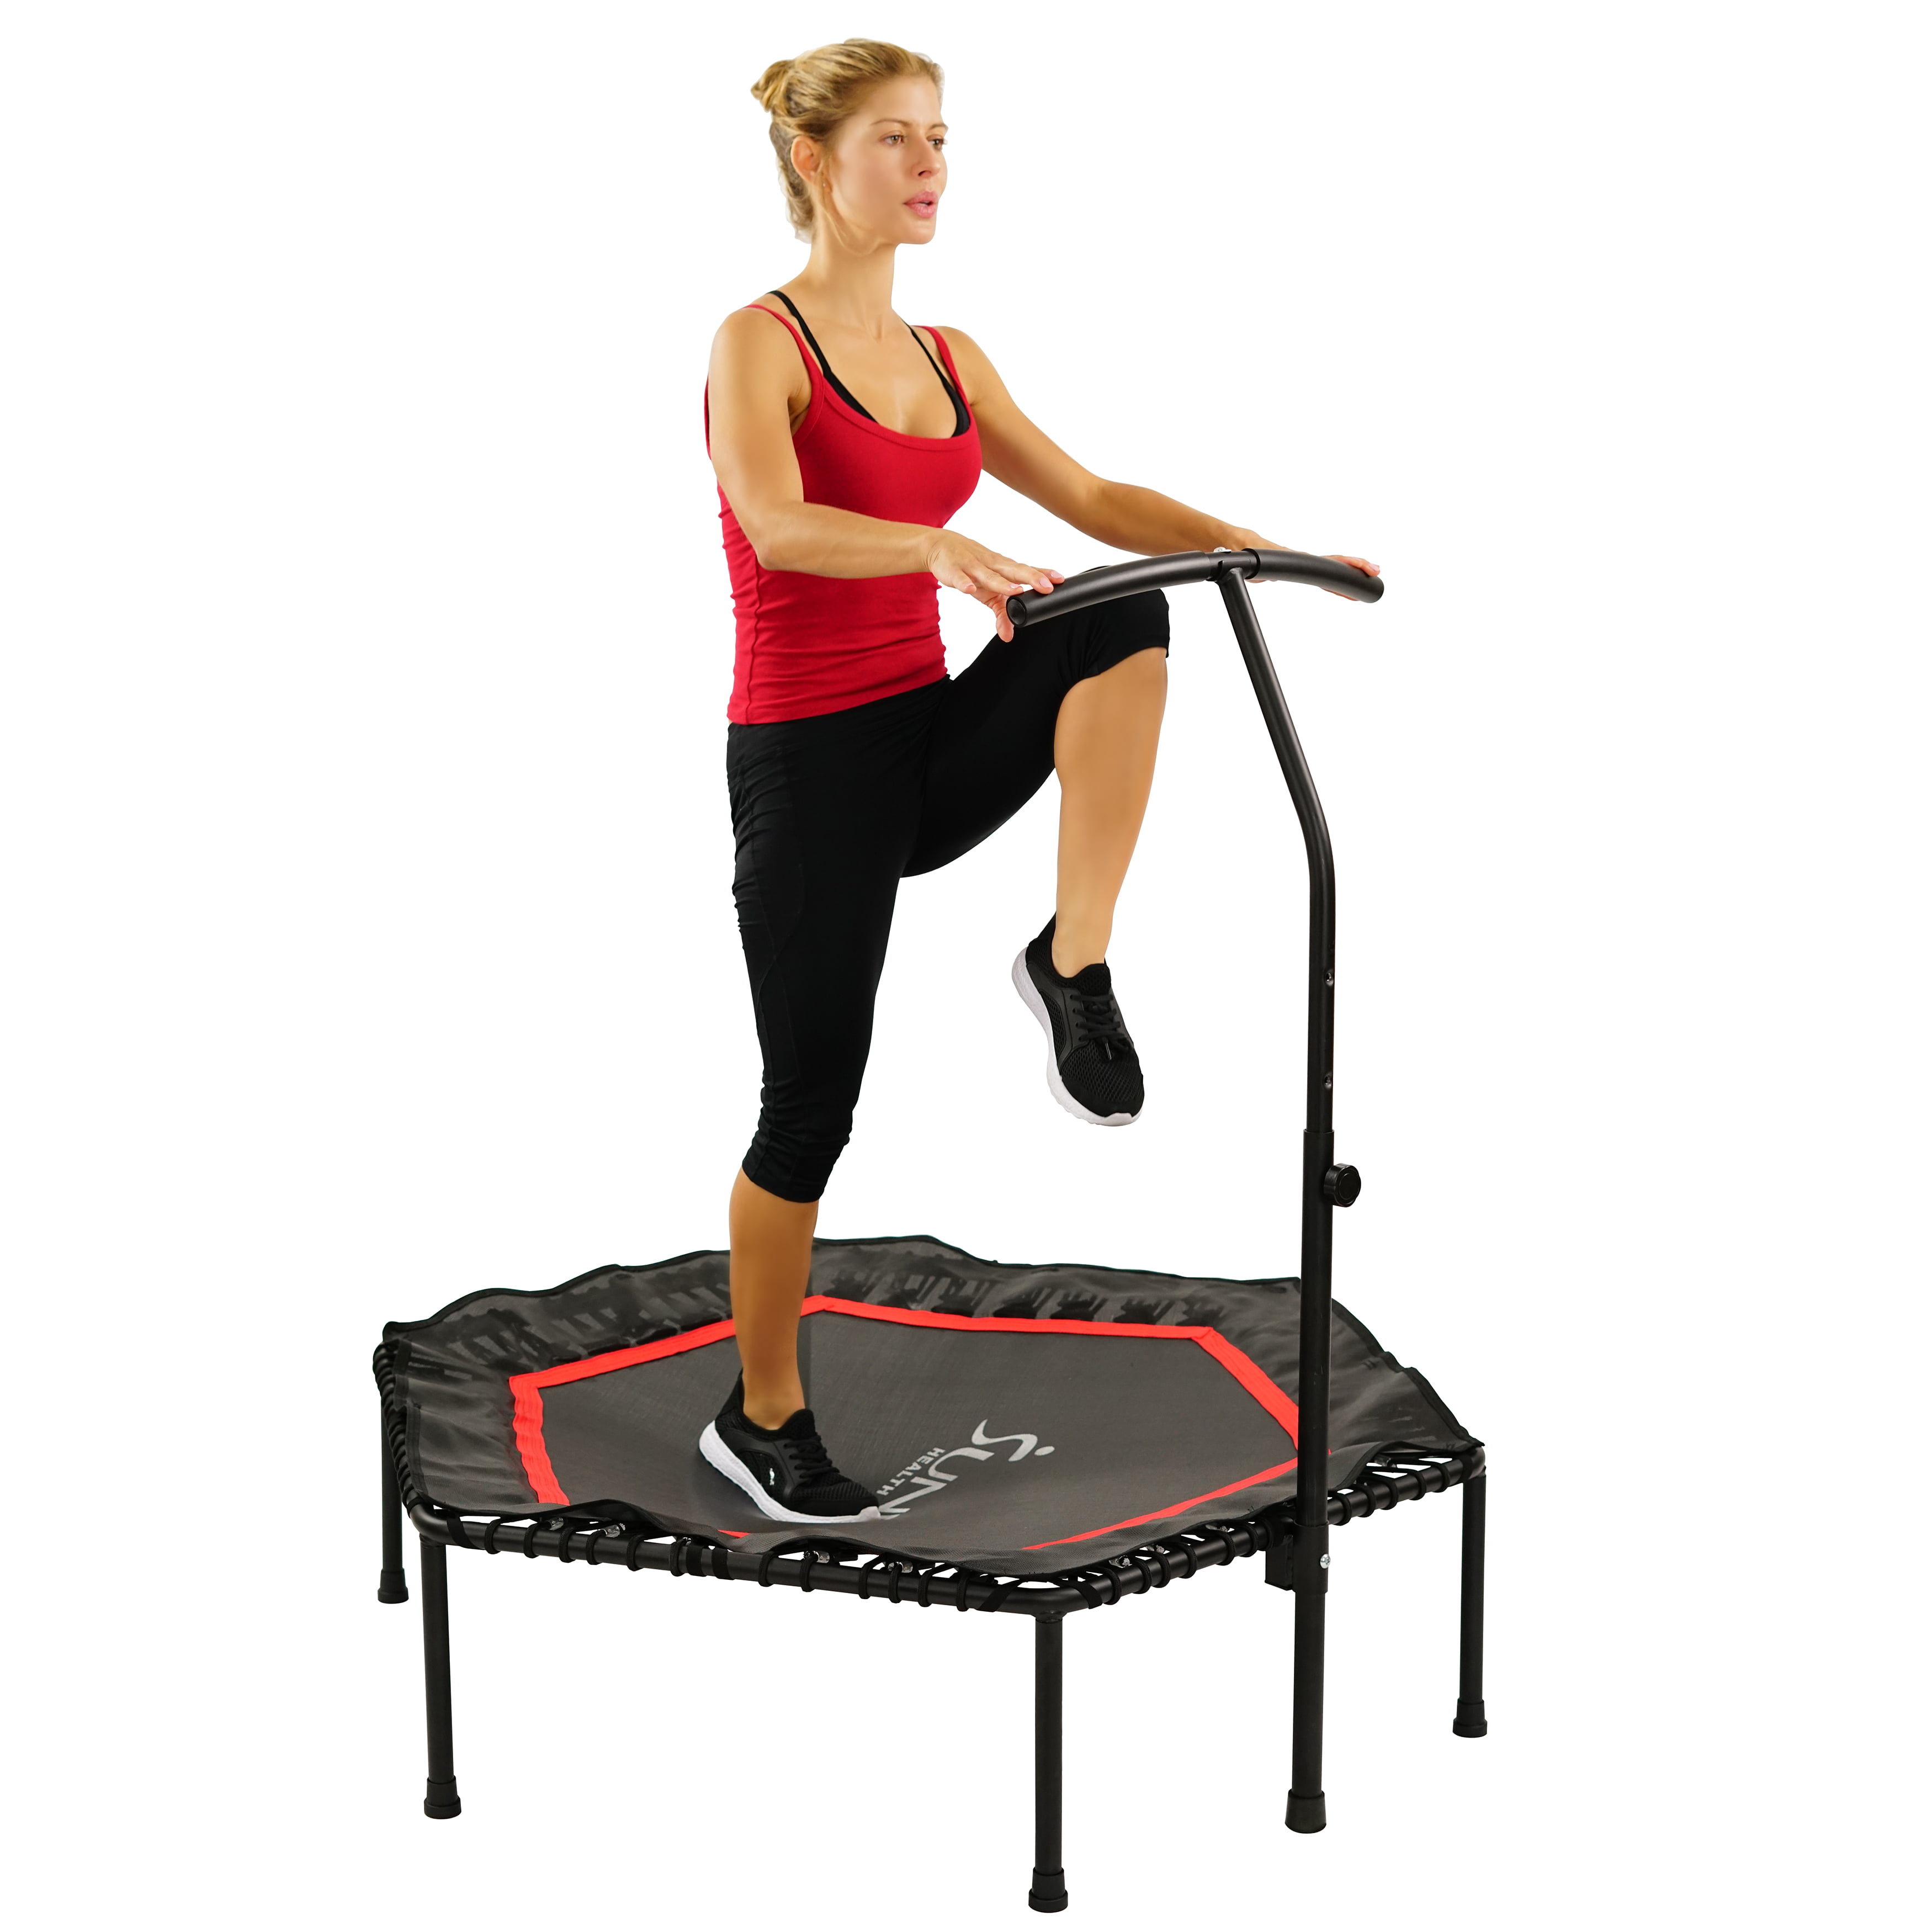 Handlebar, Sunny & with Health Exercise Fitness Indoor 079 Fitness Adjustable NO. Rebounder Trampoline Mini